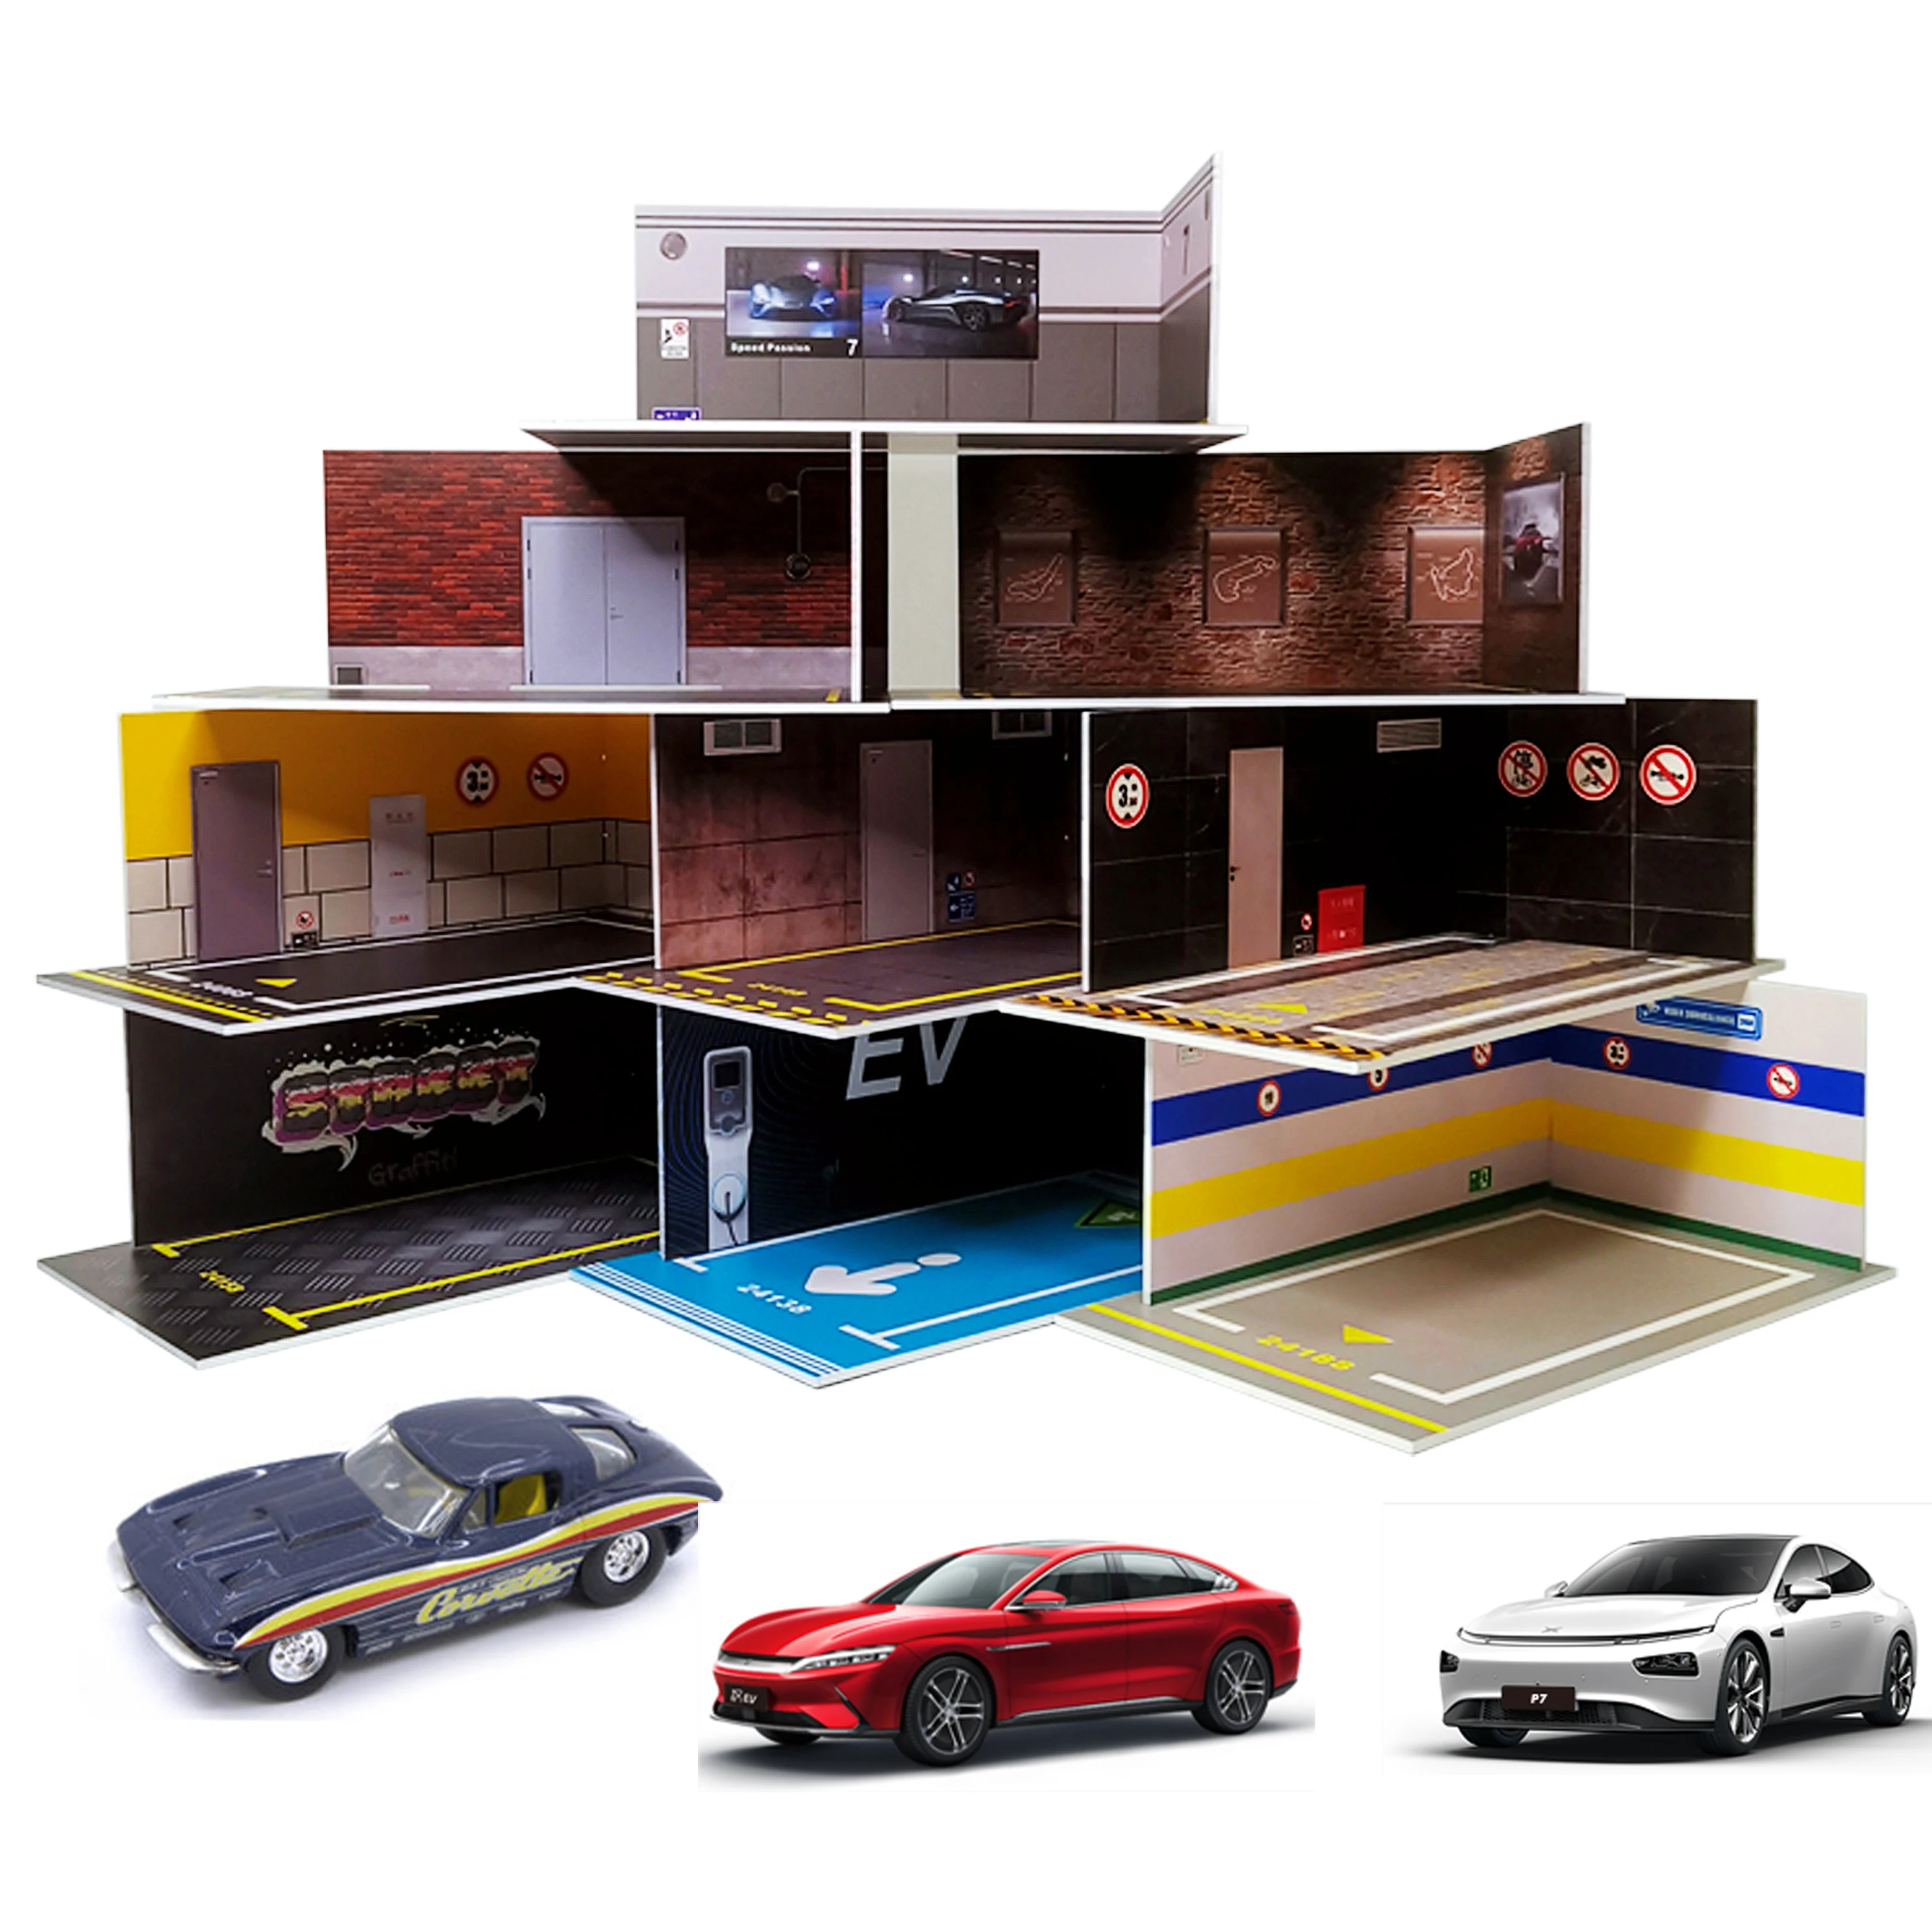 Diorama 1 24 Garage for Diecast Model Car Toy Display Case PVC Parking Lot Model Simulation Miniature Parking Space Scene